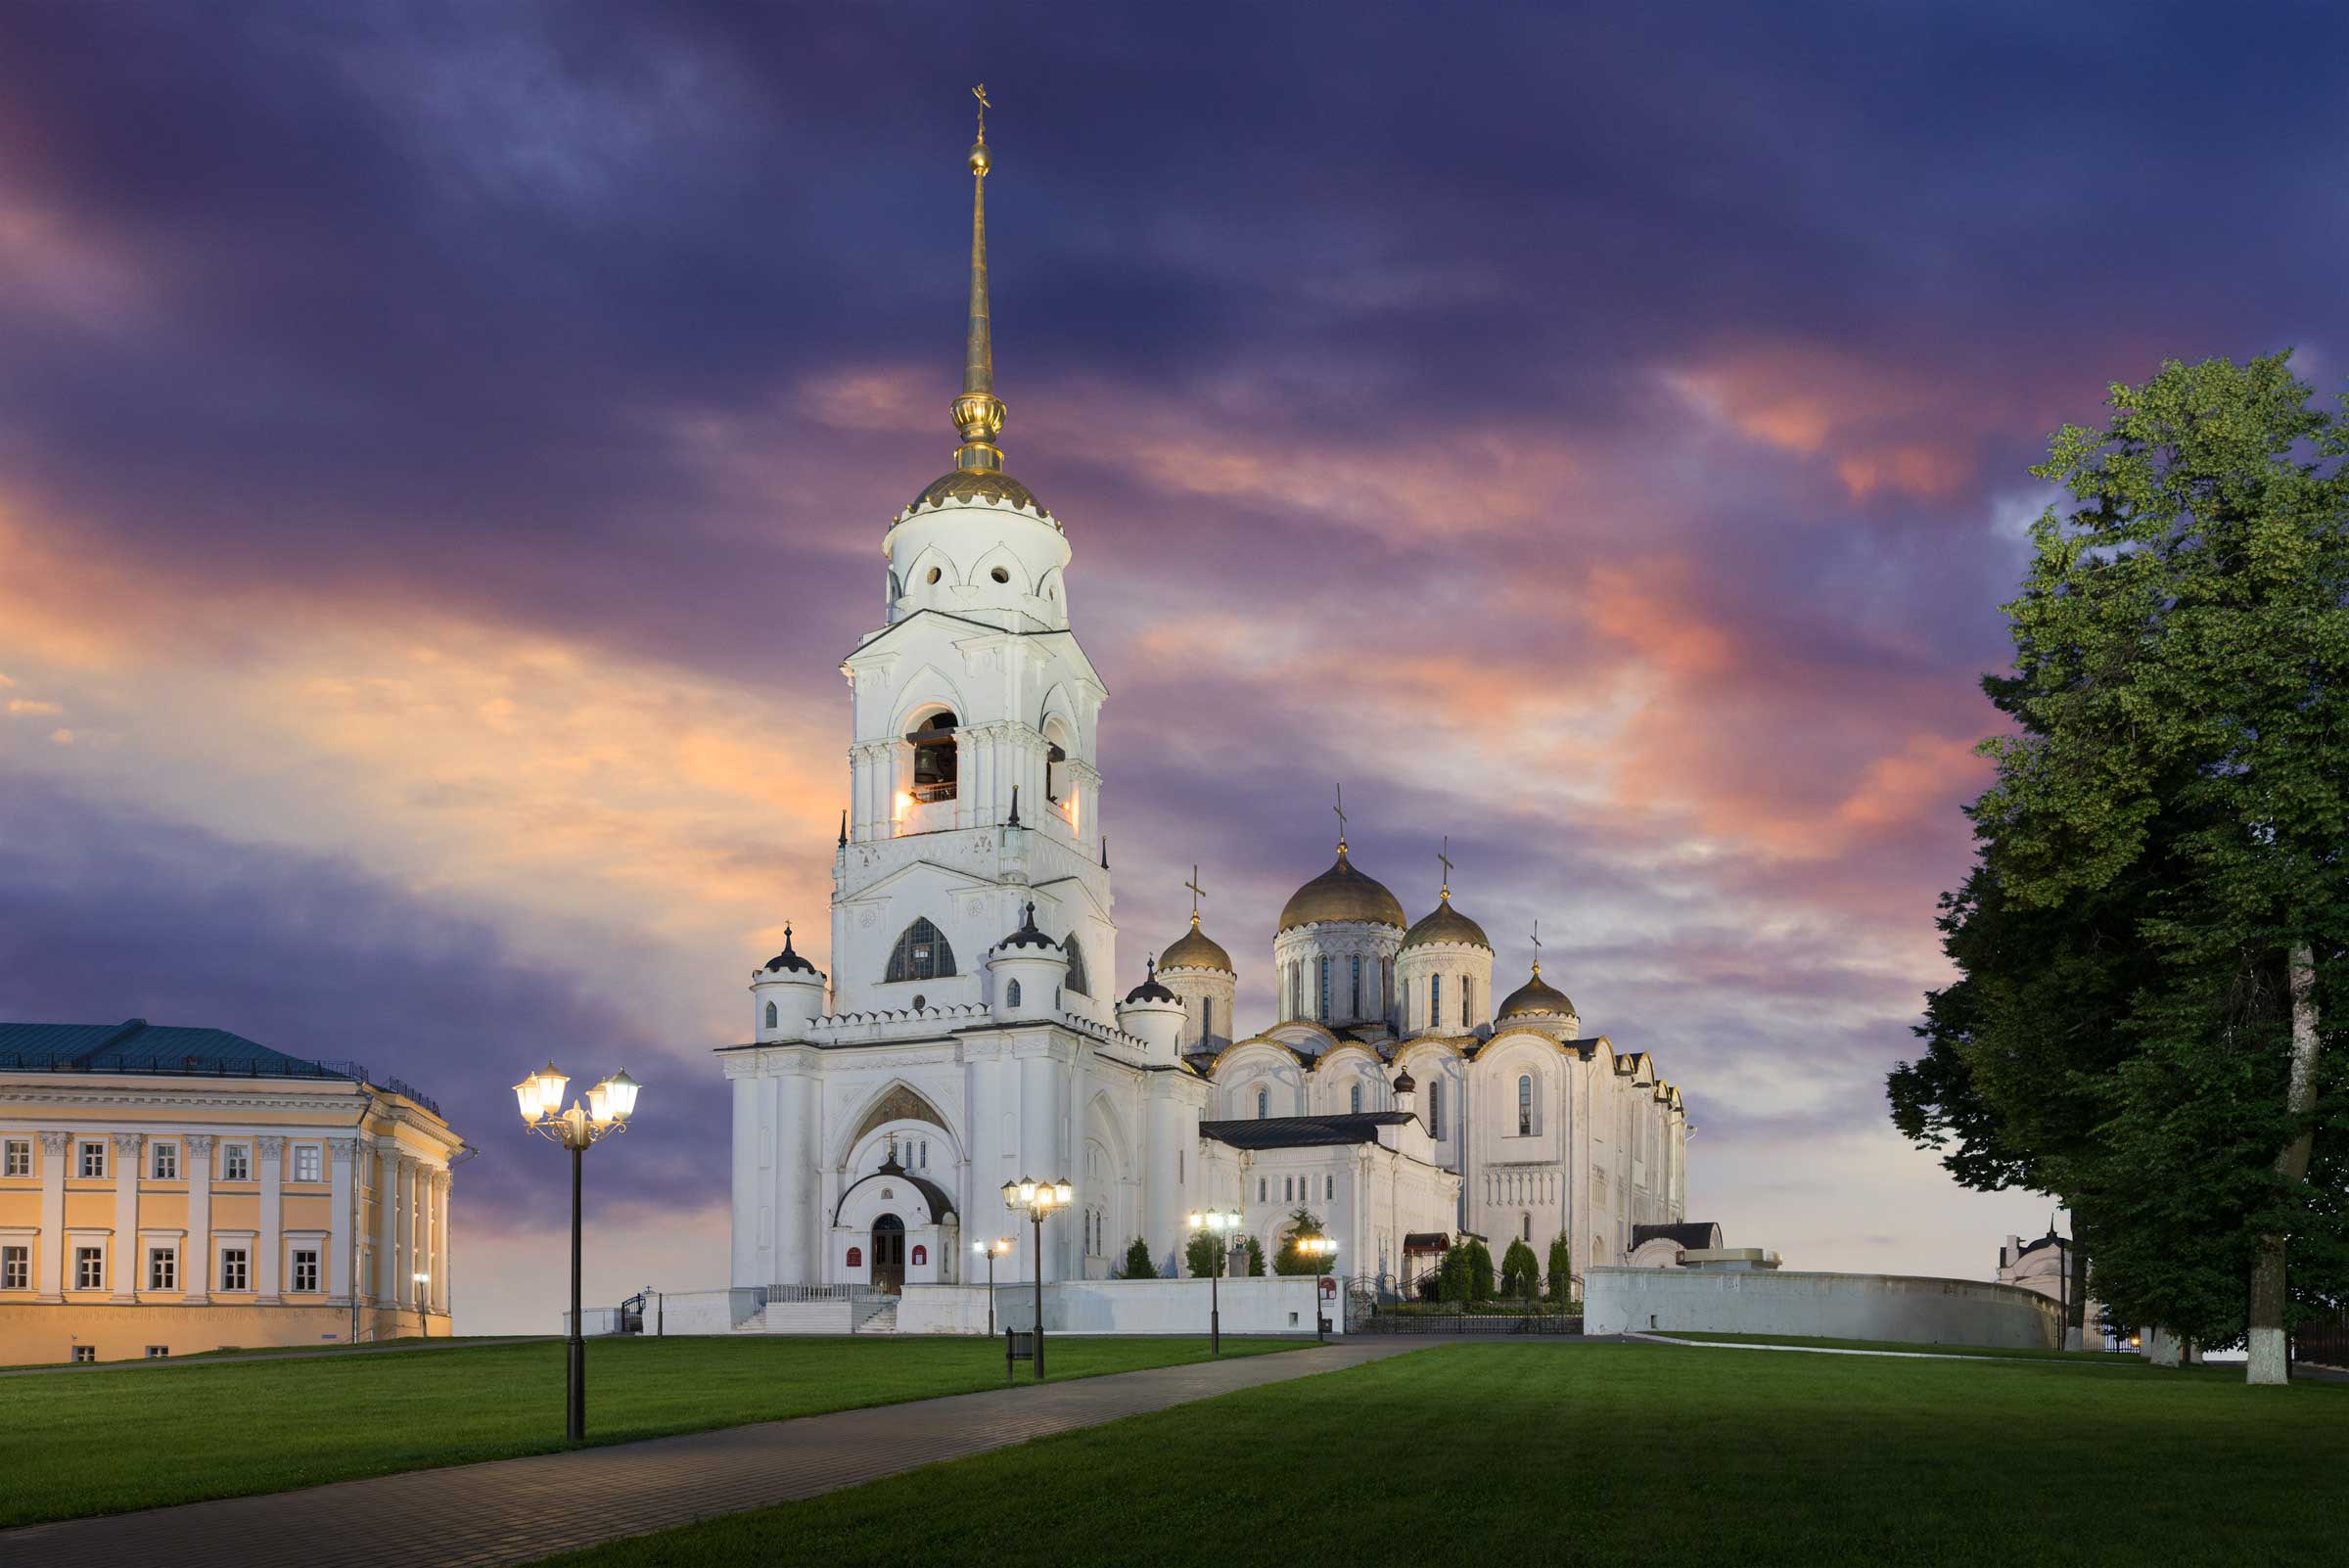 Ancient white and domed church in Vladimir